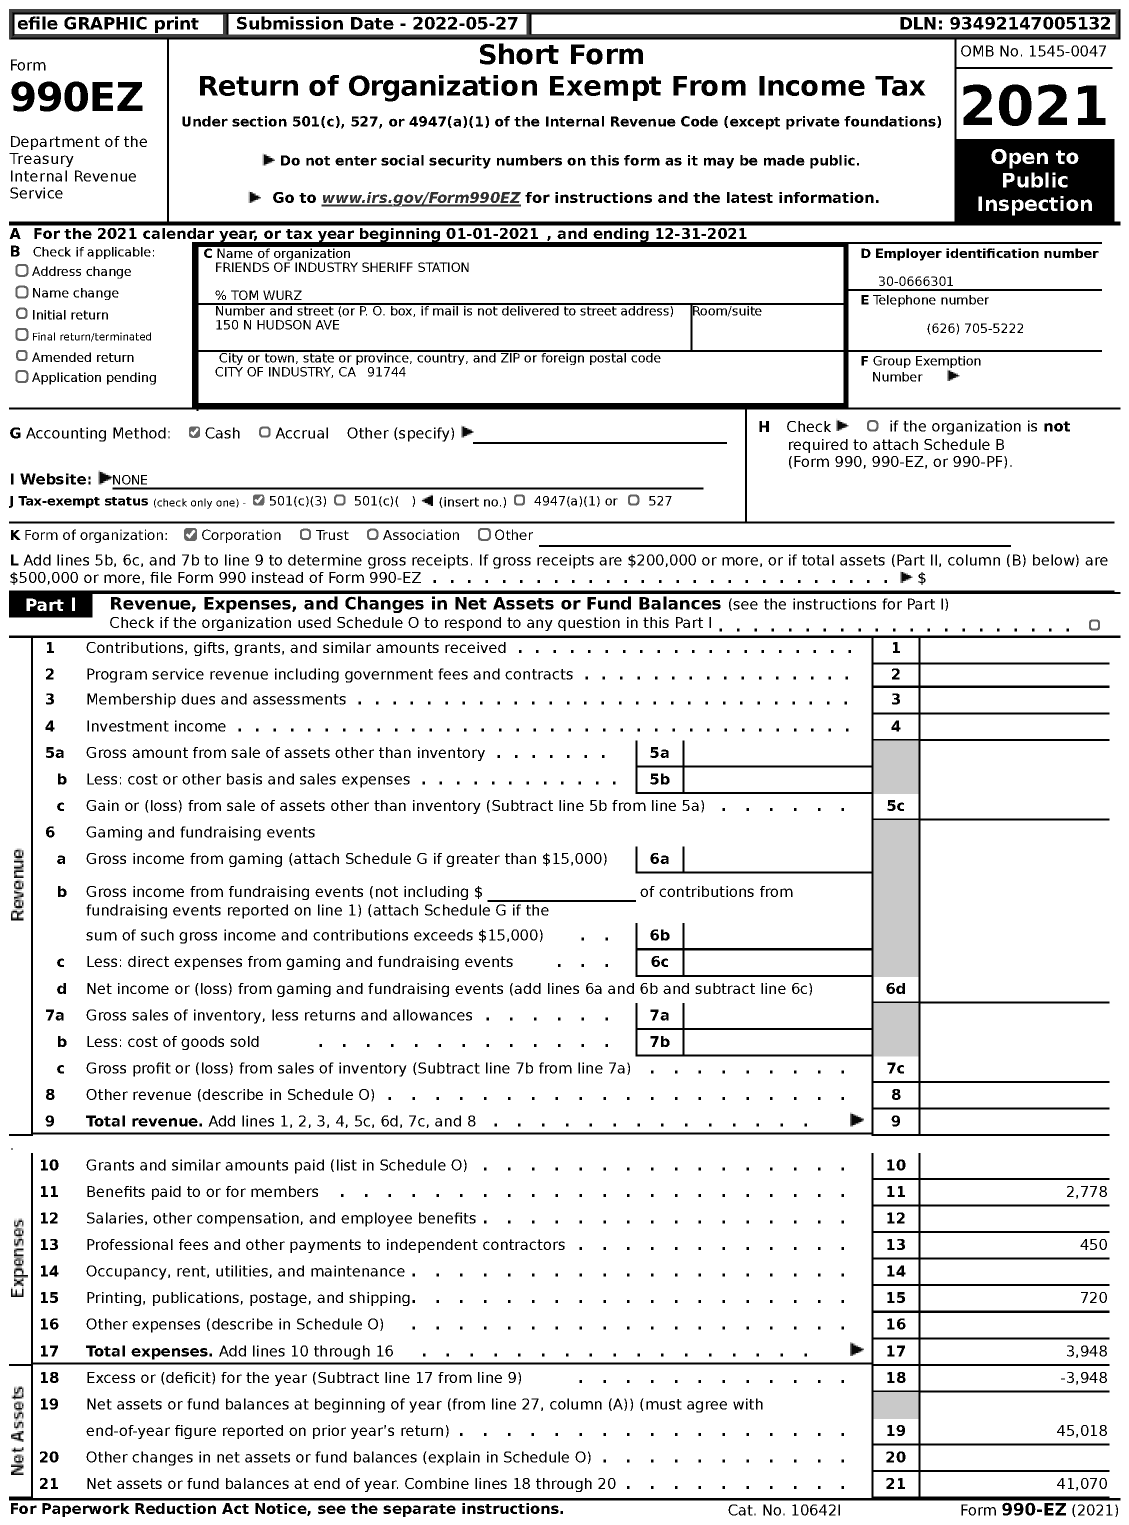 Image of first page of 2021 Form 990EZ for Friends of Industry Sheriff Station